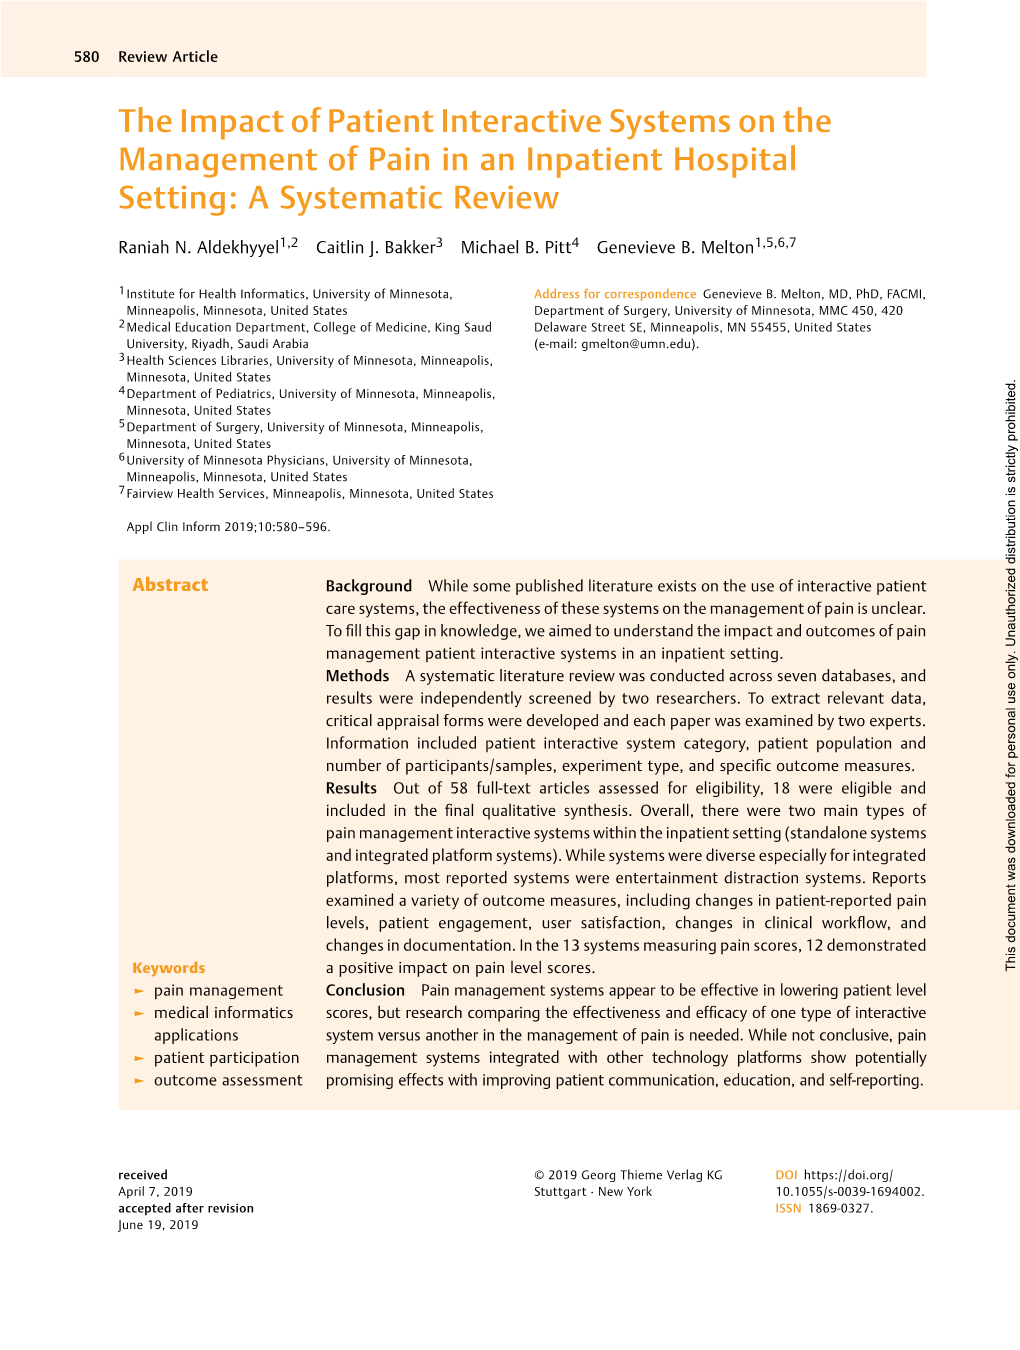 The Impact of Patient Interactive Systems on the Management of Pain in an Inpatient Hospital Setting: a Systematic Review